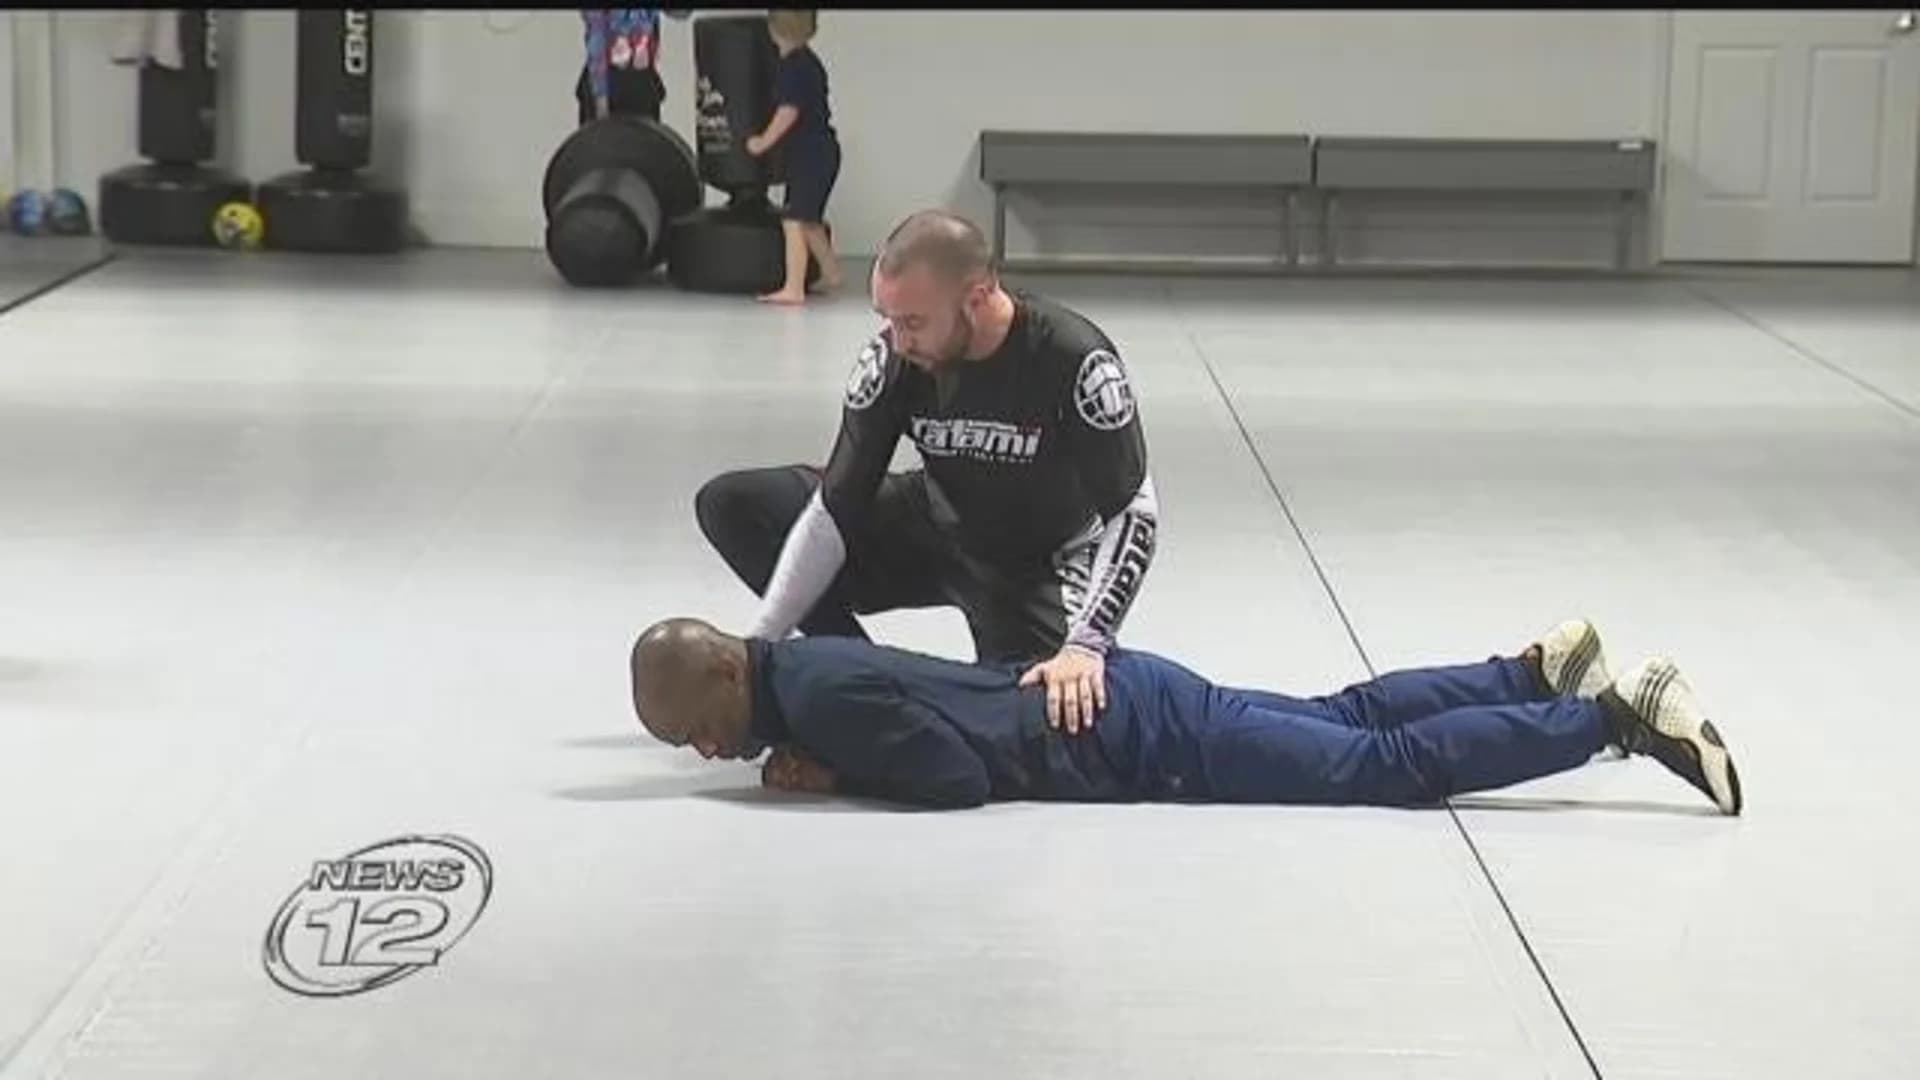 Mixed martial arts specialist teaches police officers to subdue suspects with little force